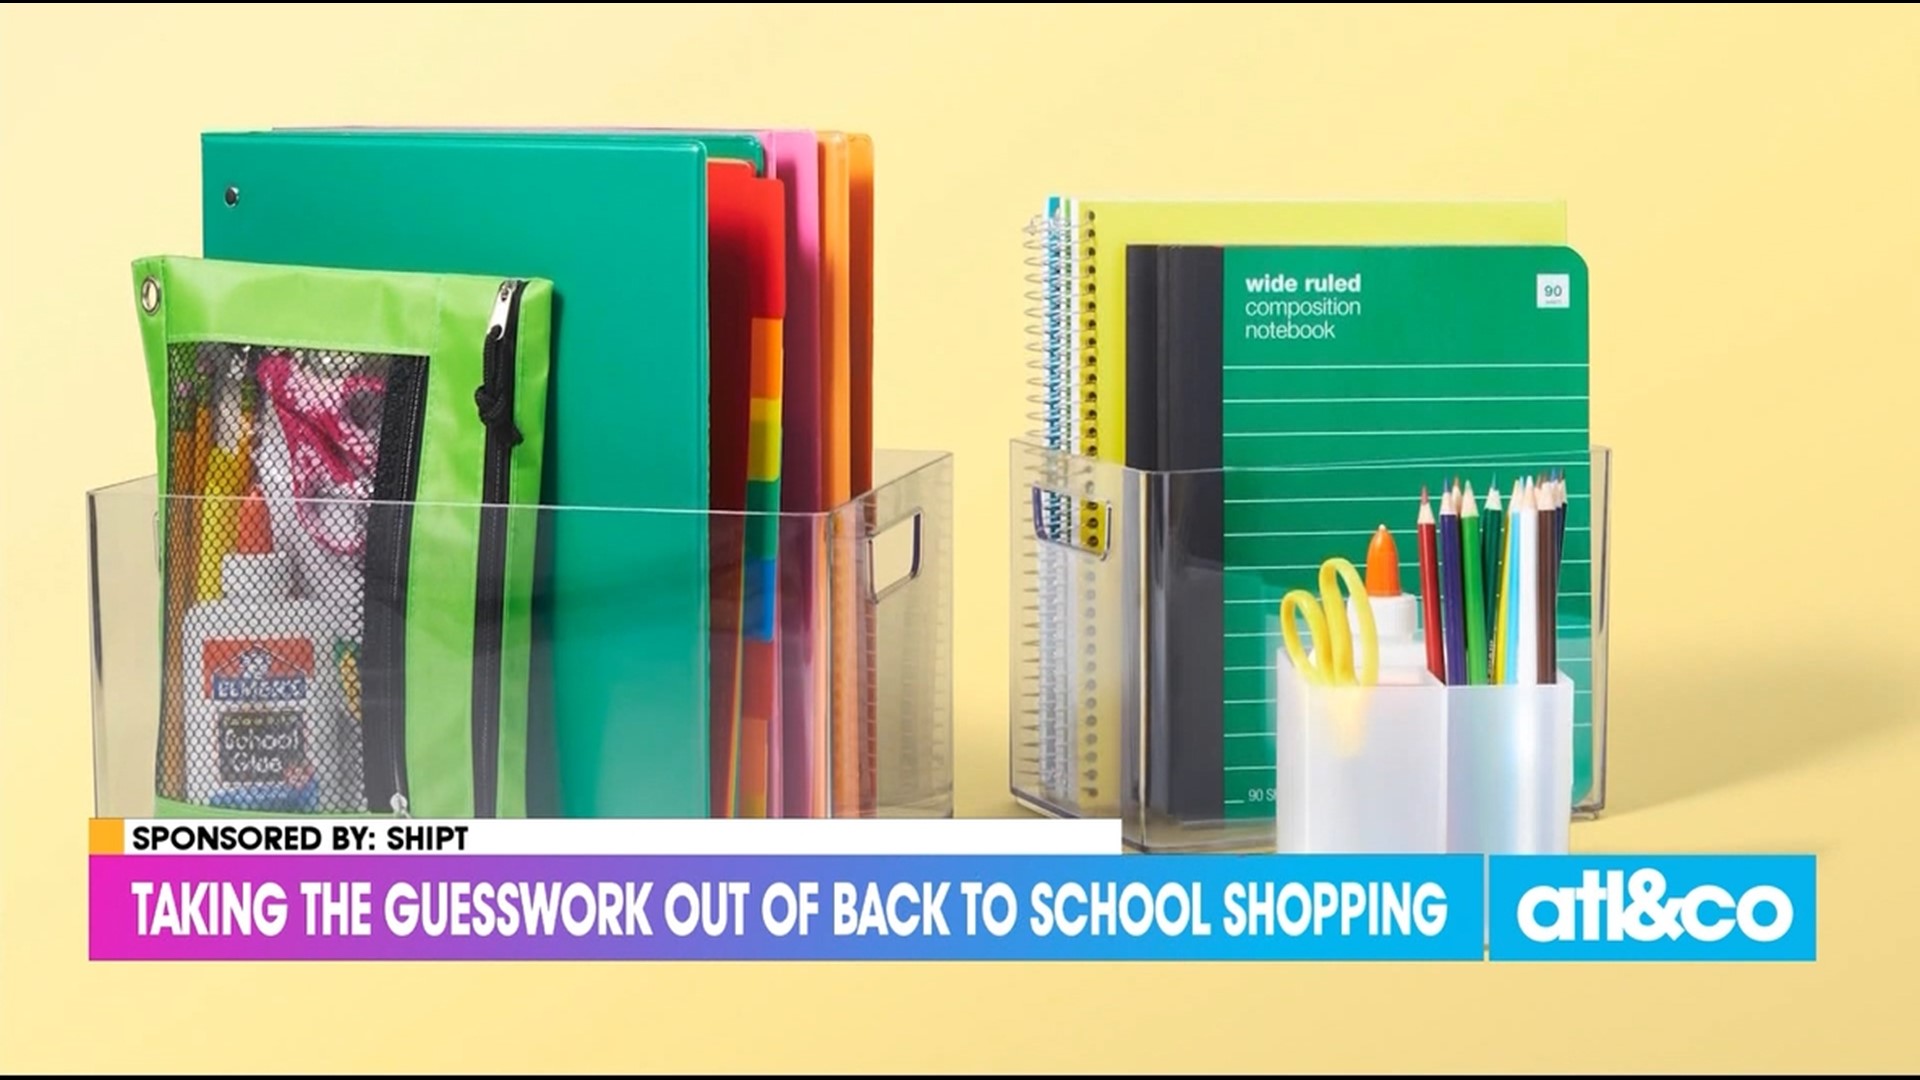 Take the guesswork out of back to school shopping with Shipt!